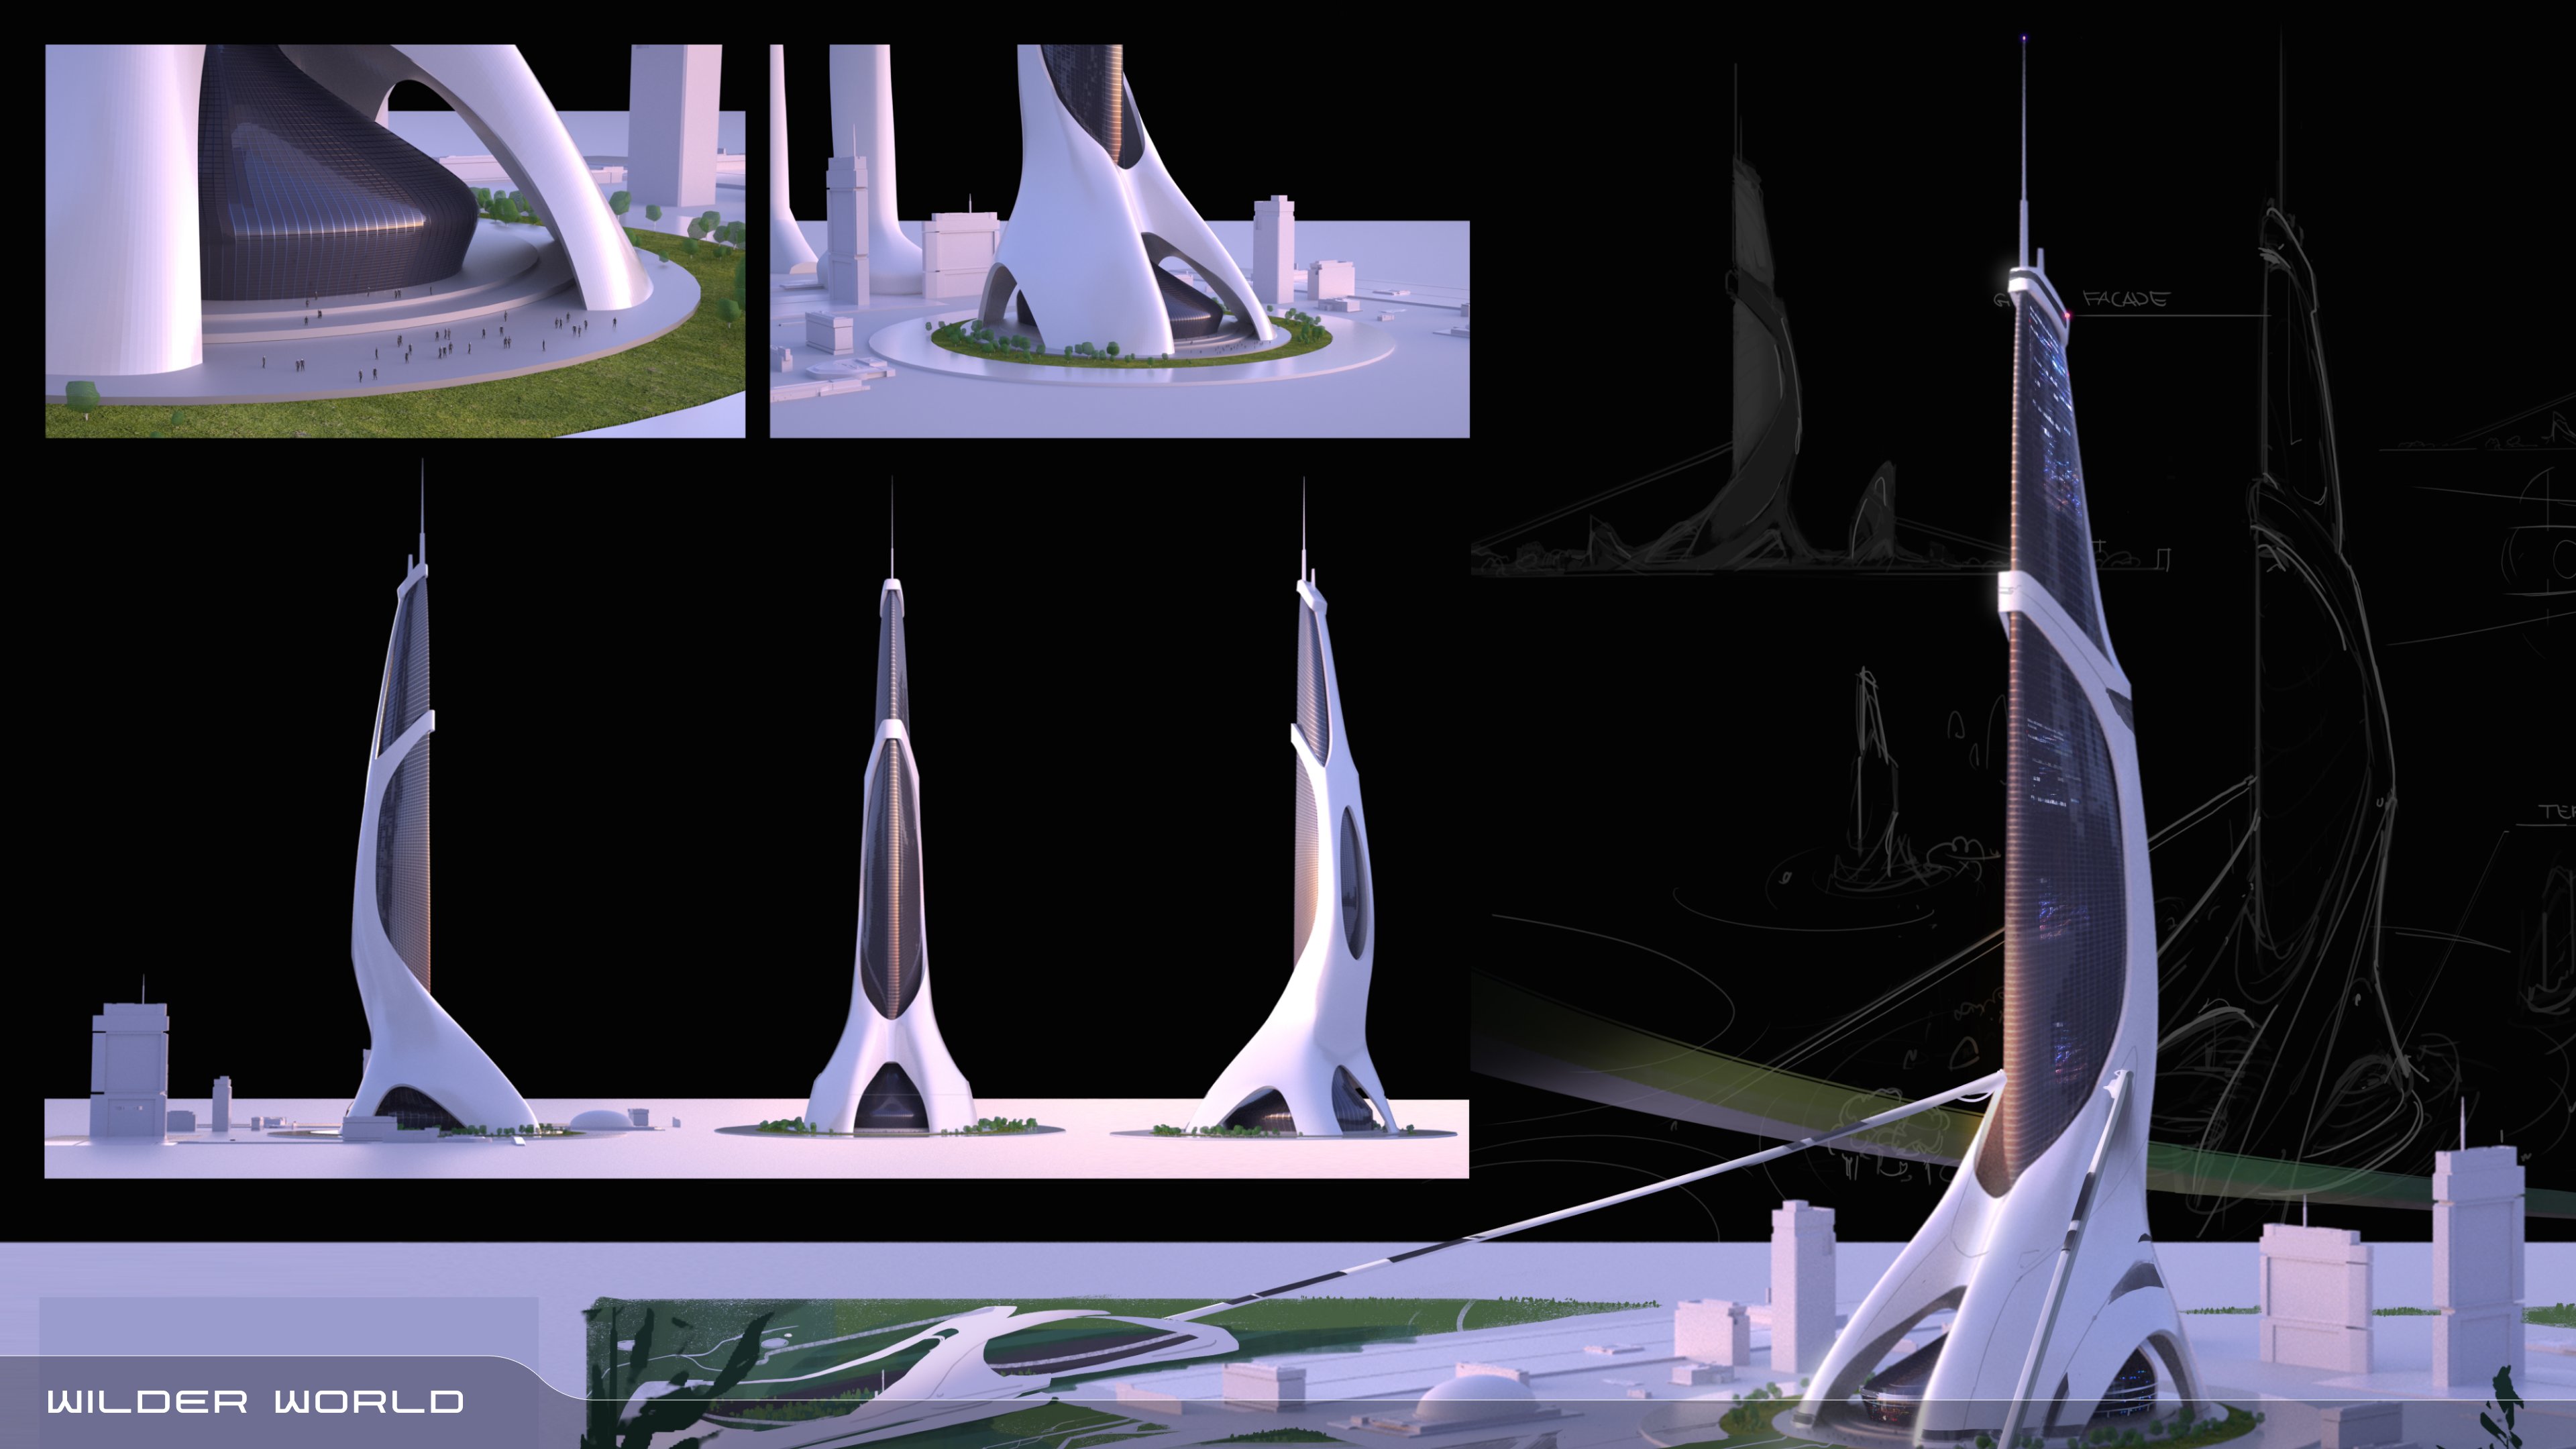 Concept art of W1, a Tower that will Serve as the Wilder Embassy and HQ